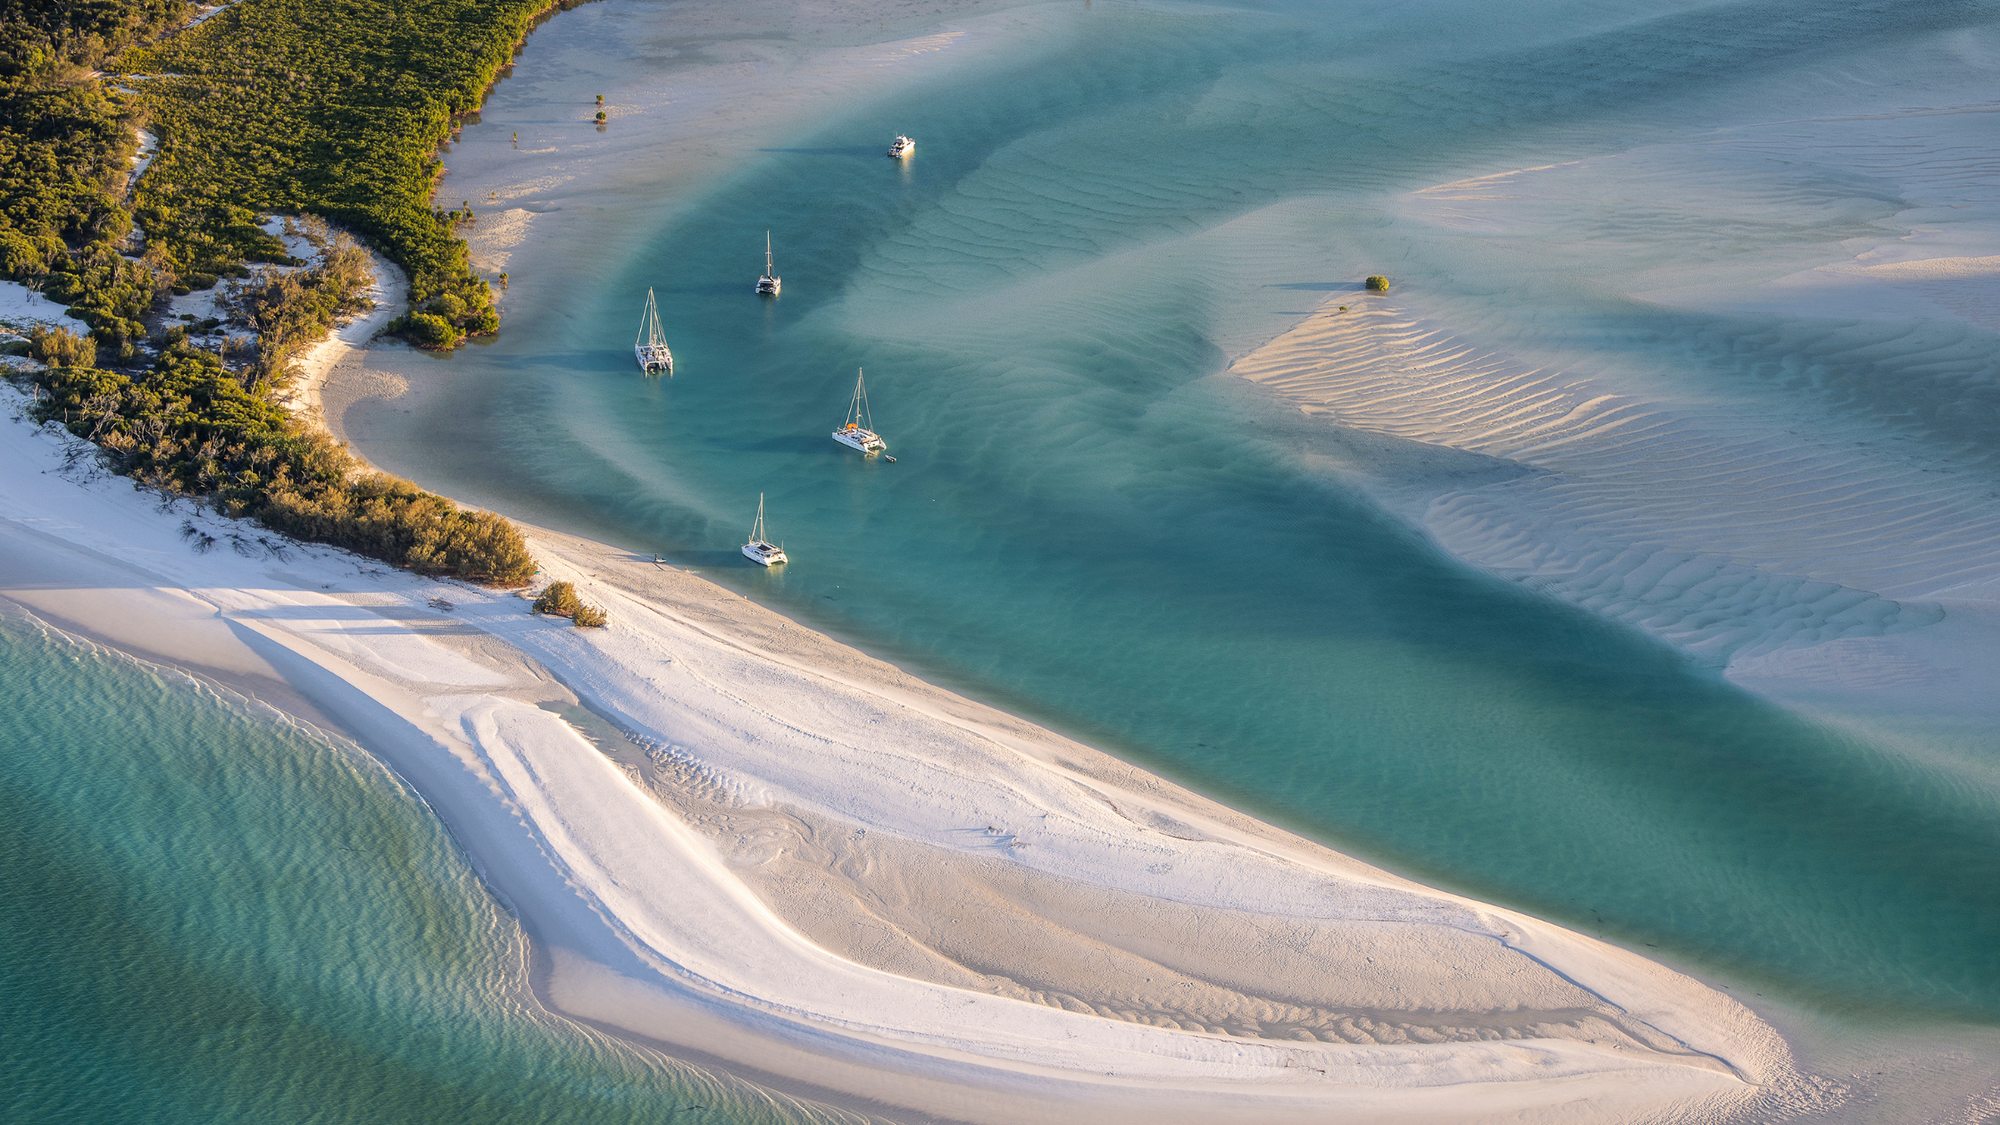 Hill Inlet at Sunset. Introducing ‘Love of Light’